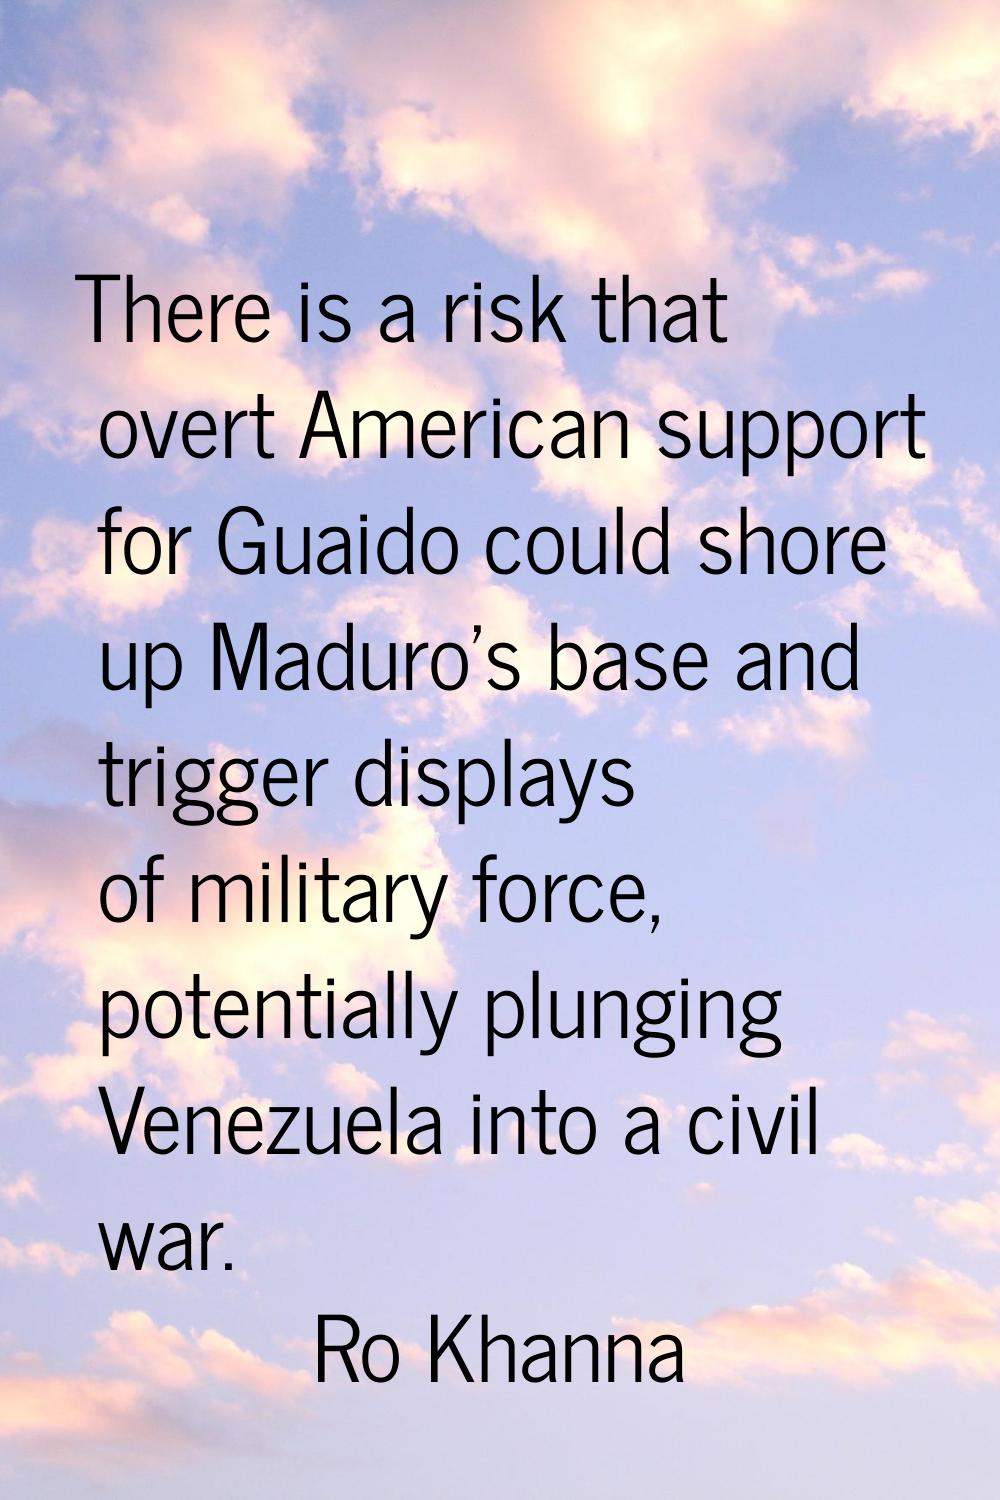 There is a risk that overt American support for Guaido could shore up Maduro's base and trigger dis